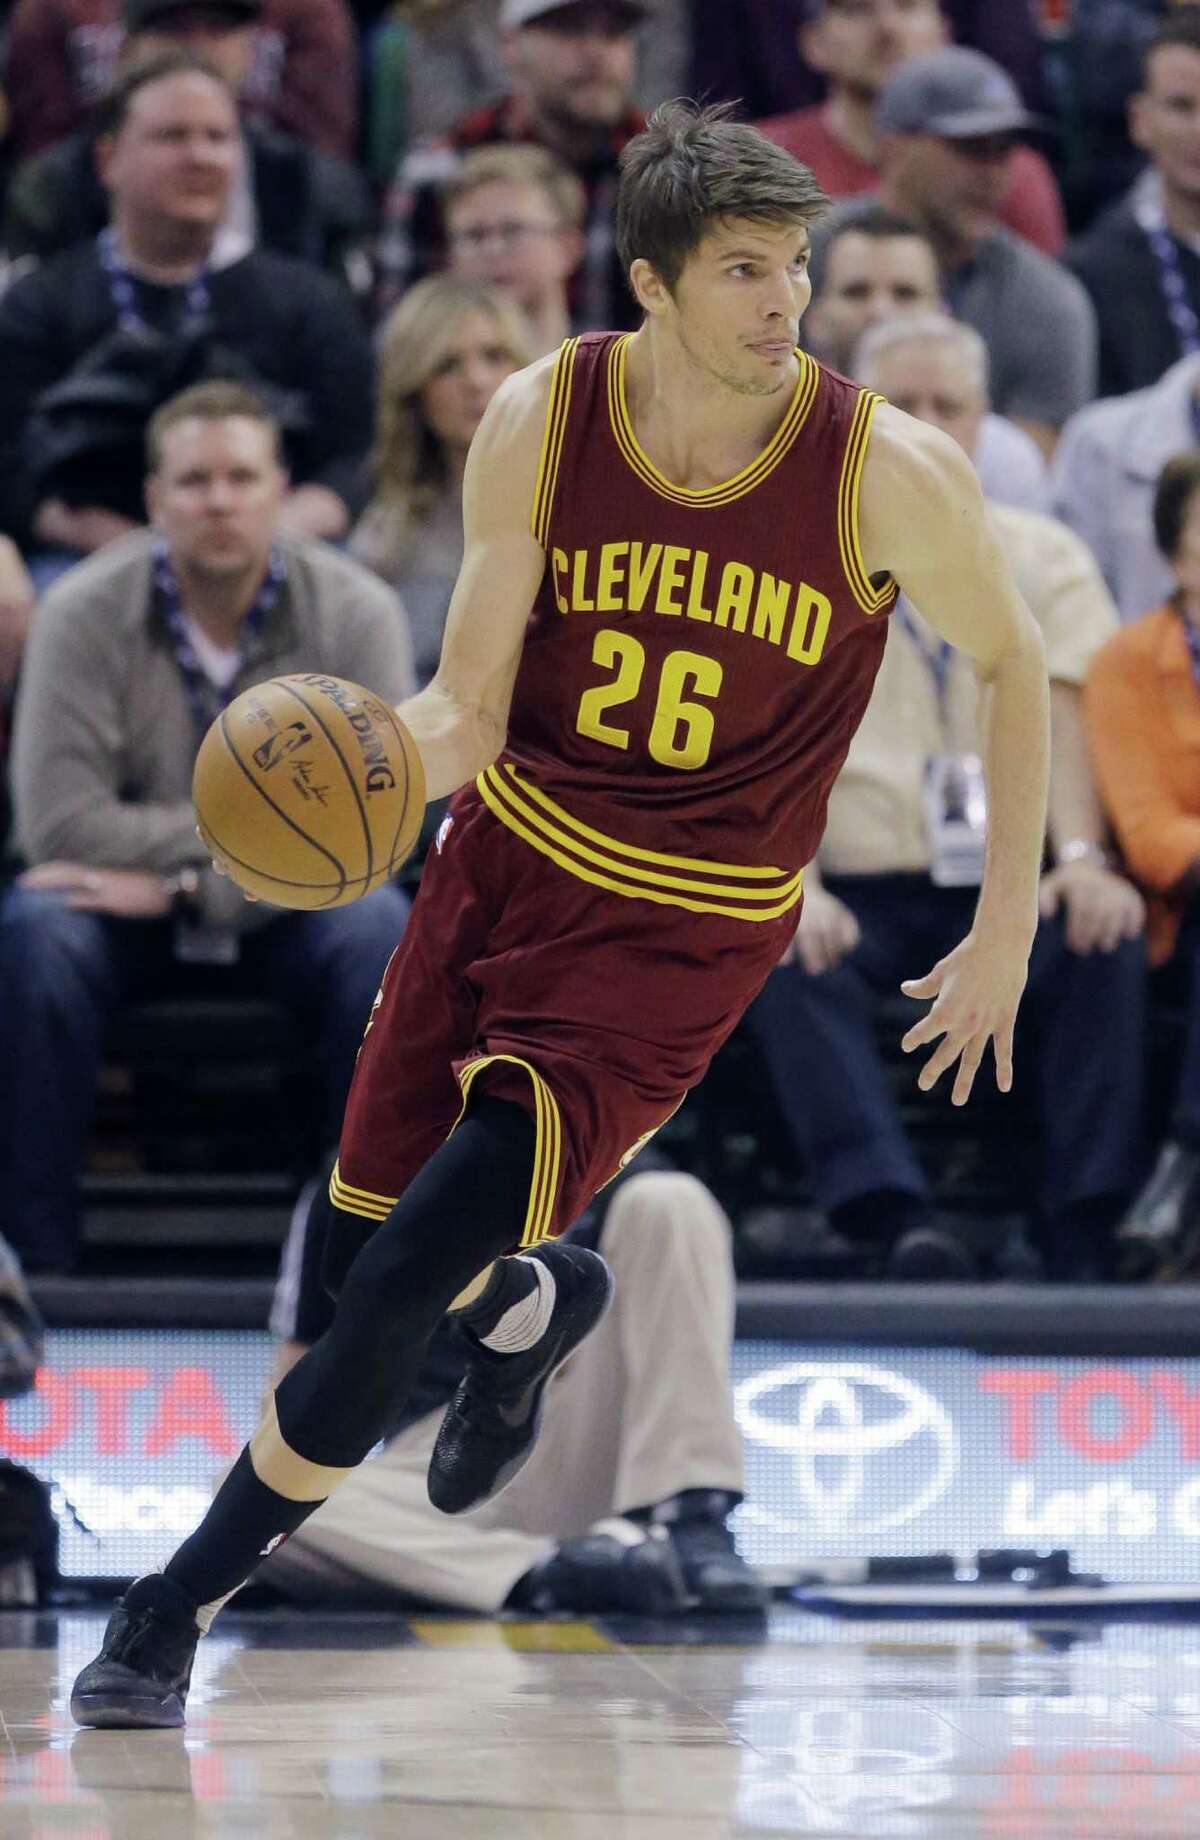 Cleveland Cavaliers guard Kyle Korver (26) brings the ball up court in the first half against the Utah Jazz on Jan. 10, 2017, in Salt Lake City.